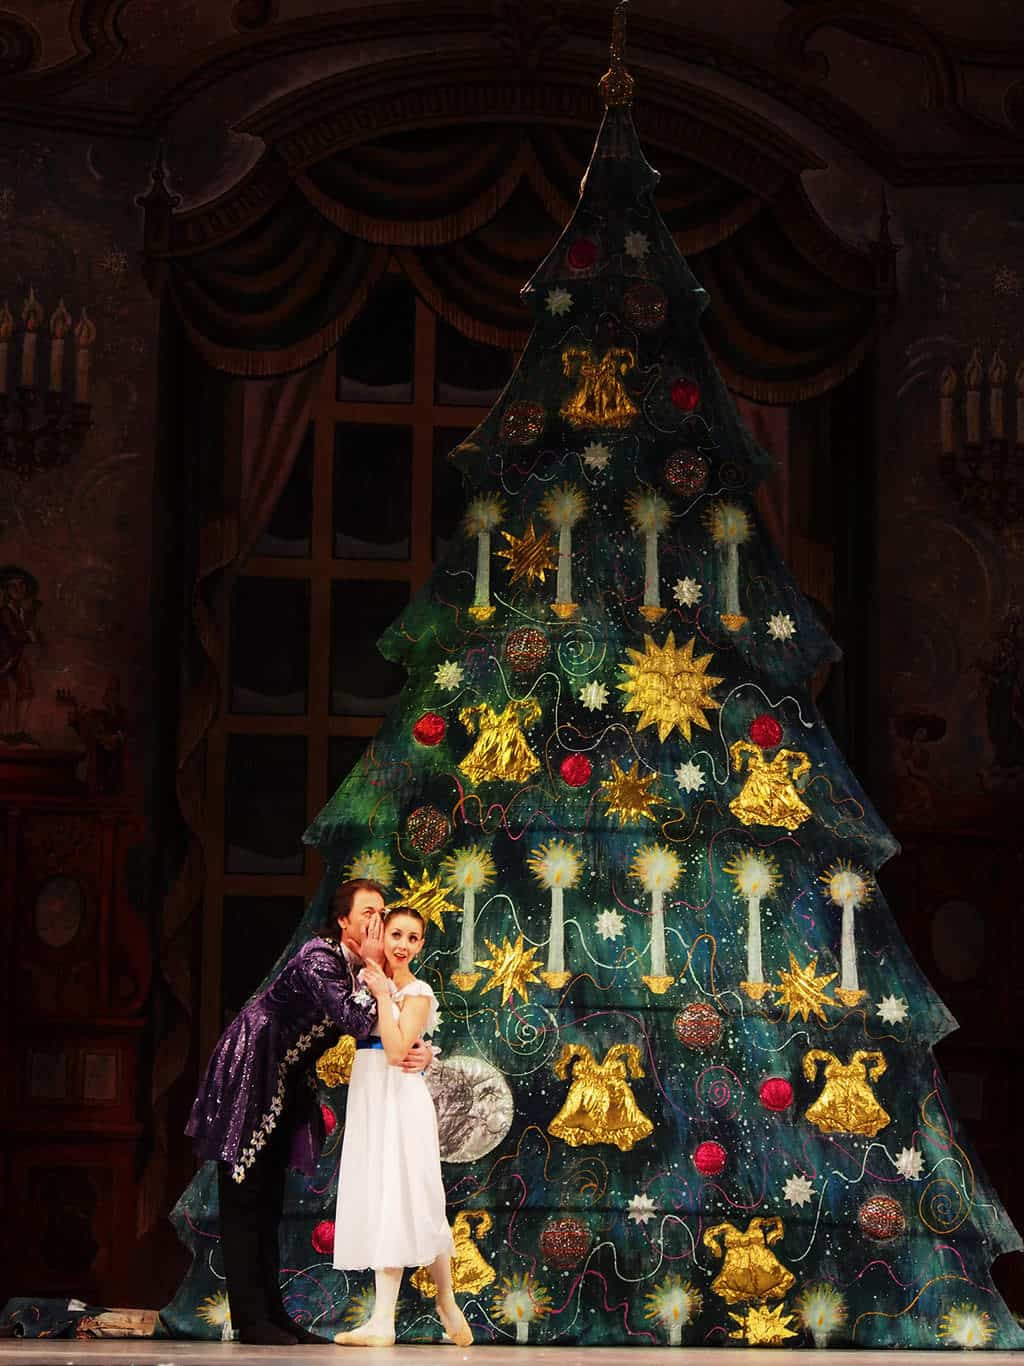 Clara and her godfather on stage during the Nutcracker Ballet